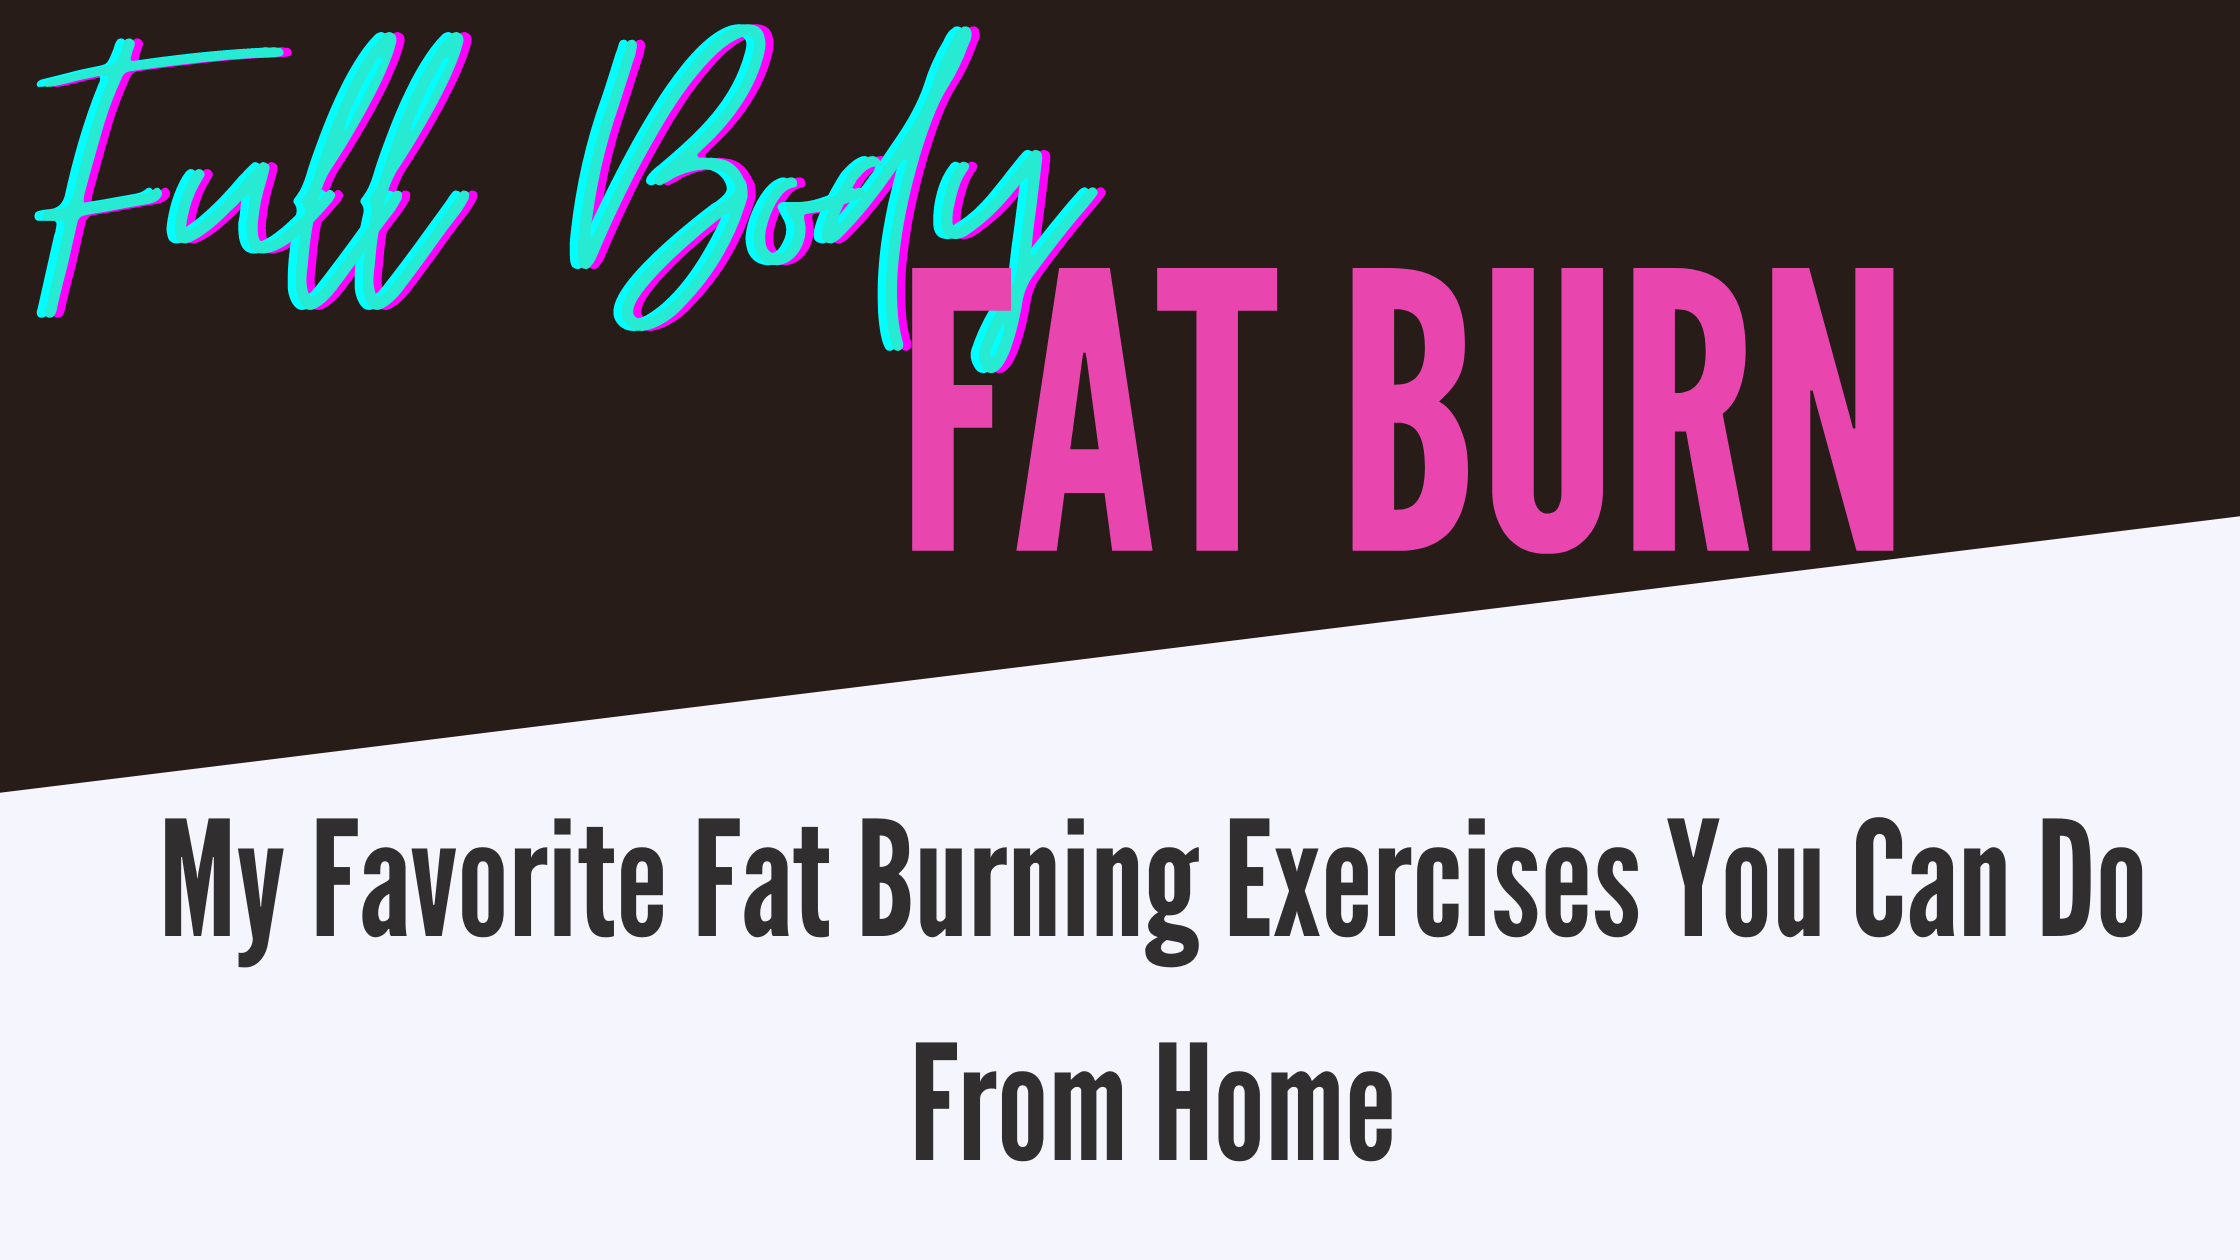 Full Body Fat Burn: My Favorite Fat Burning Exercises You Can Do From Home